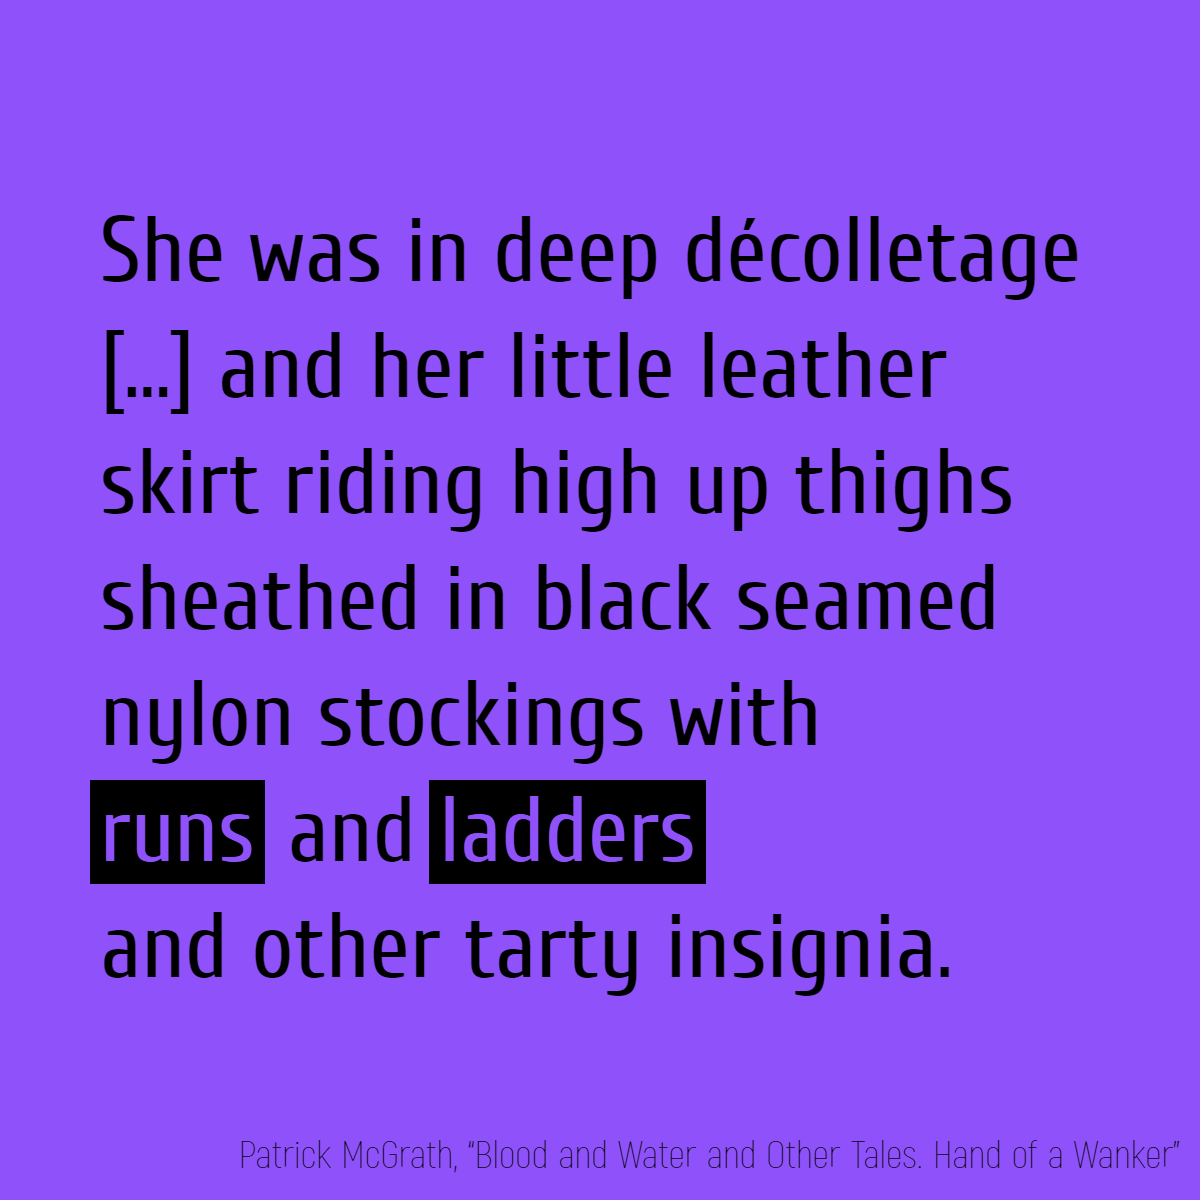 She was in deep décolletage, her cleavage shadow sharply accentuated by the subdued lighting of the mood lounge, and her little leather skirt riding high up thighs sheathed in black seamed nylon stockings withruns and ladders and other tarty insignia.